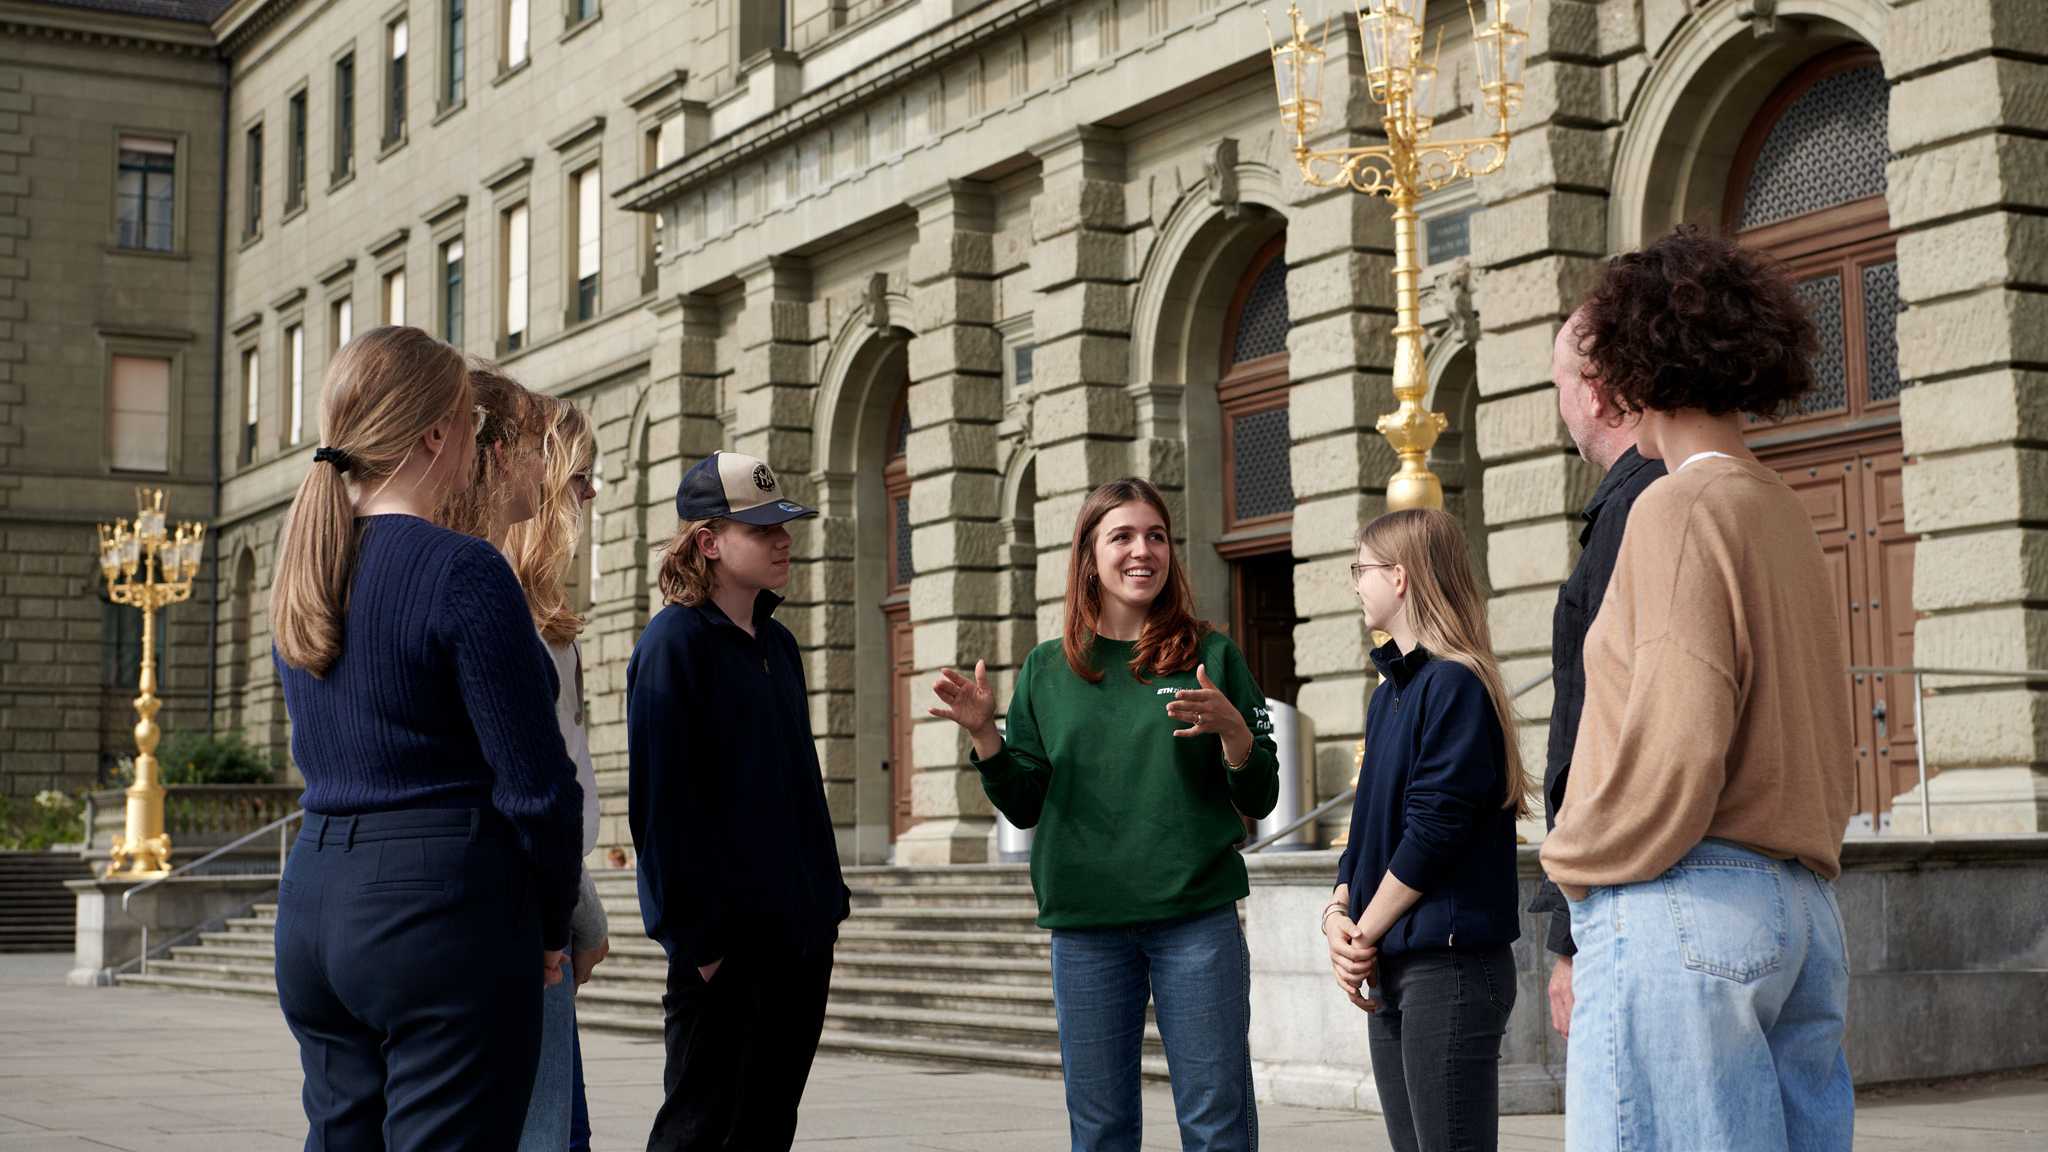 ETH group tour with guide in front of the Campus Centre building